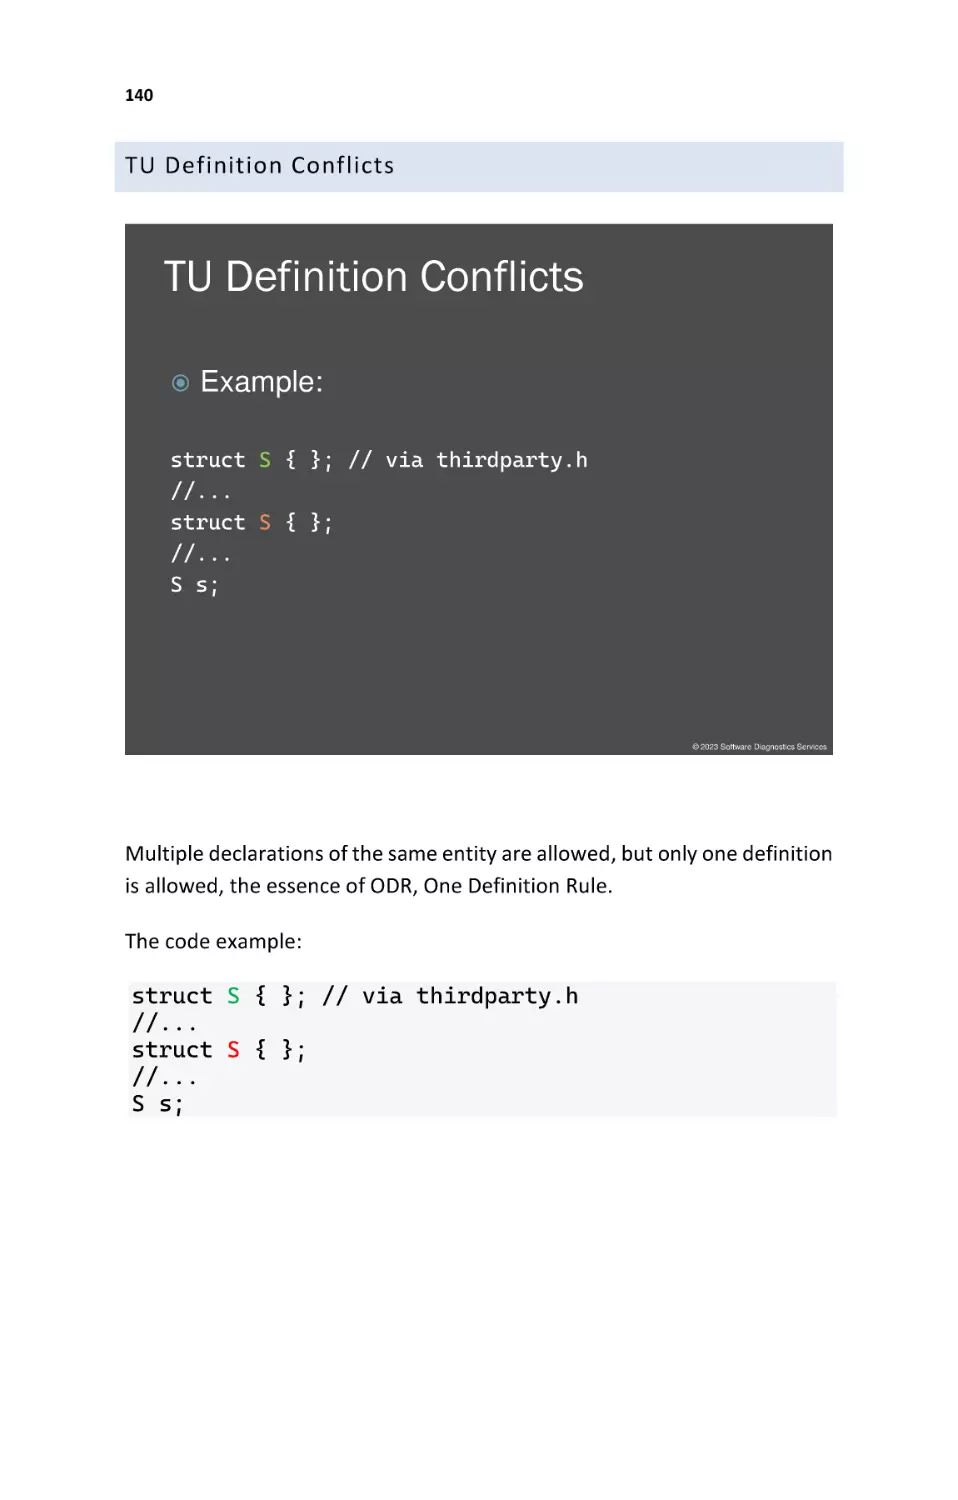 TU Definition Conflicts